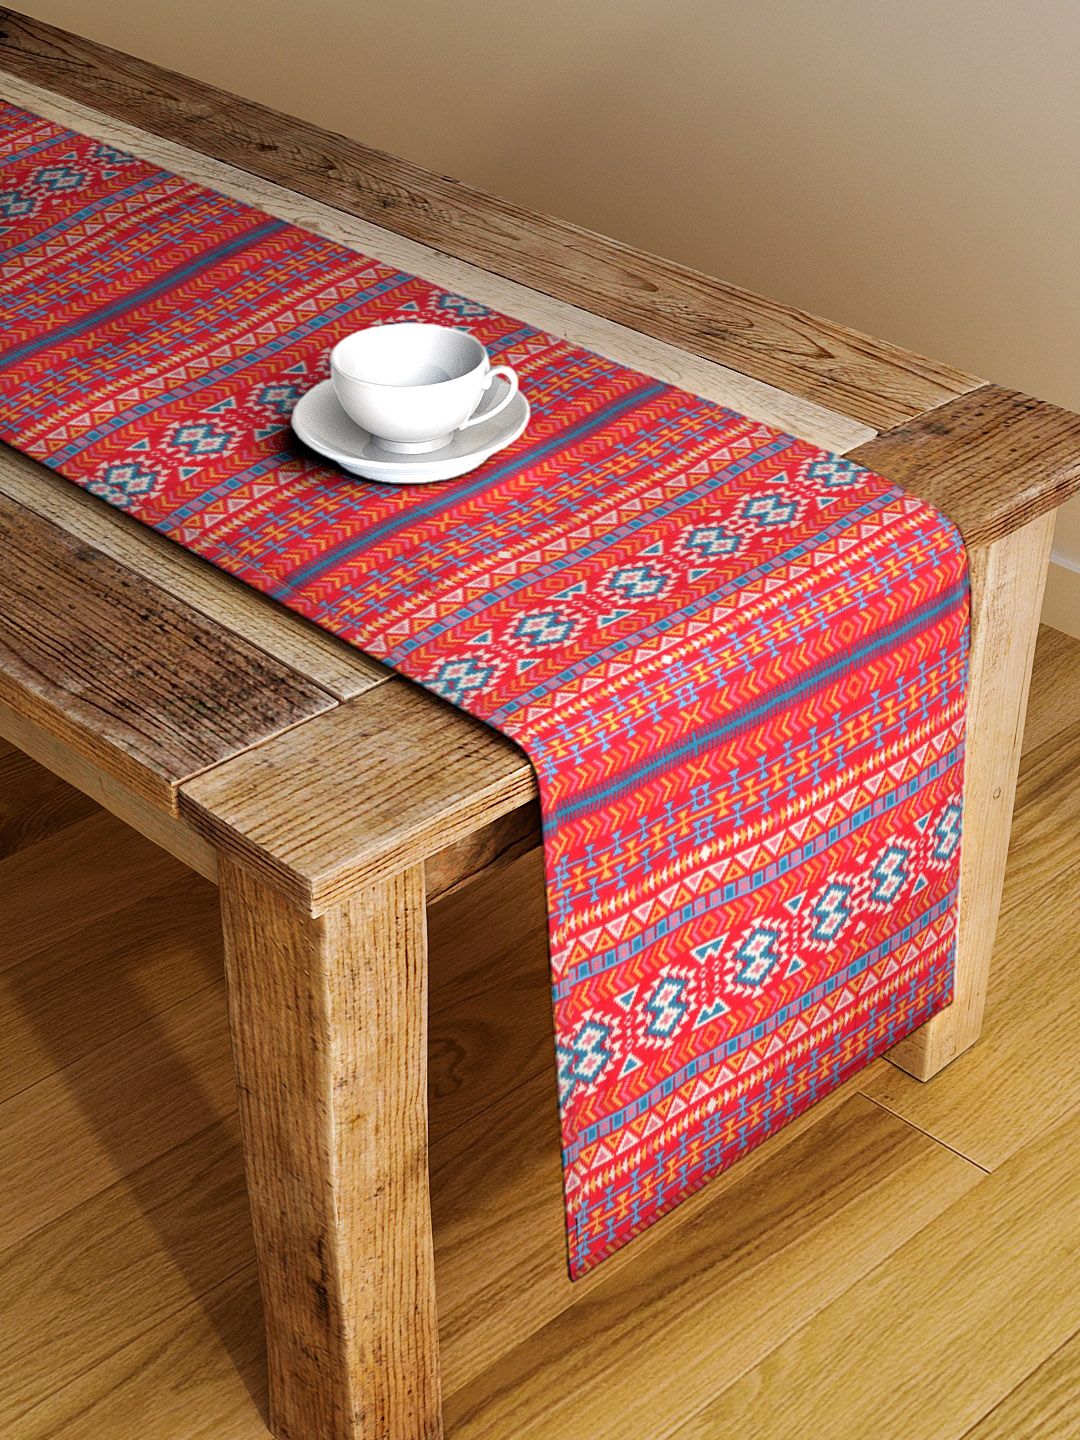 Alina decor Red & Blue Digitally Printed Table Runner Price in India